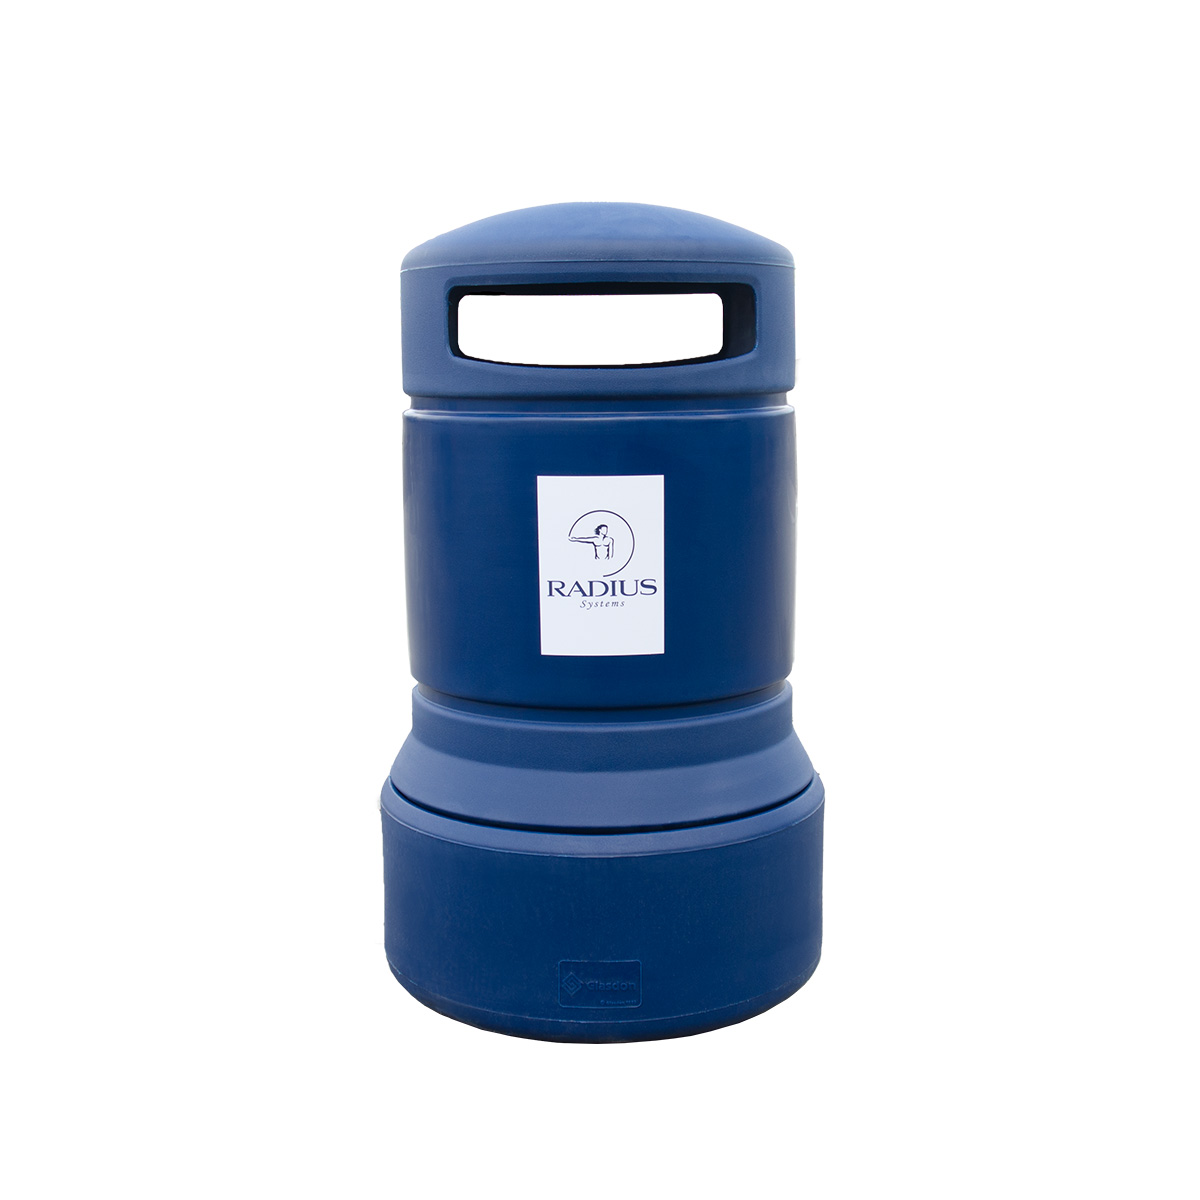 Plaza® Litter Bin with personalised front graphic